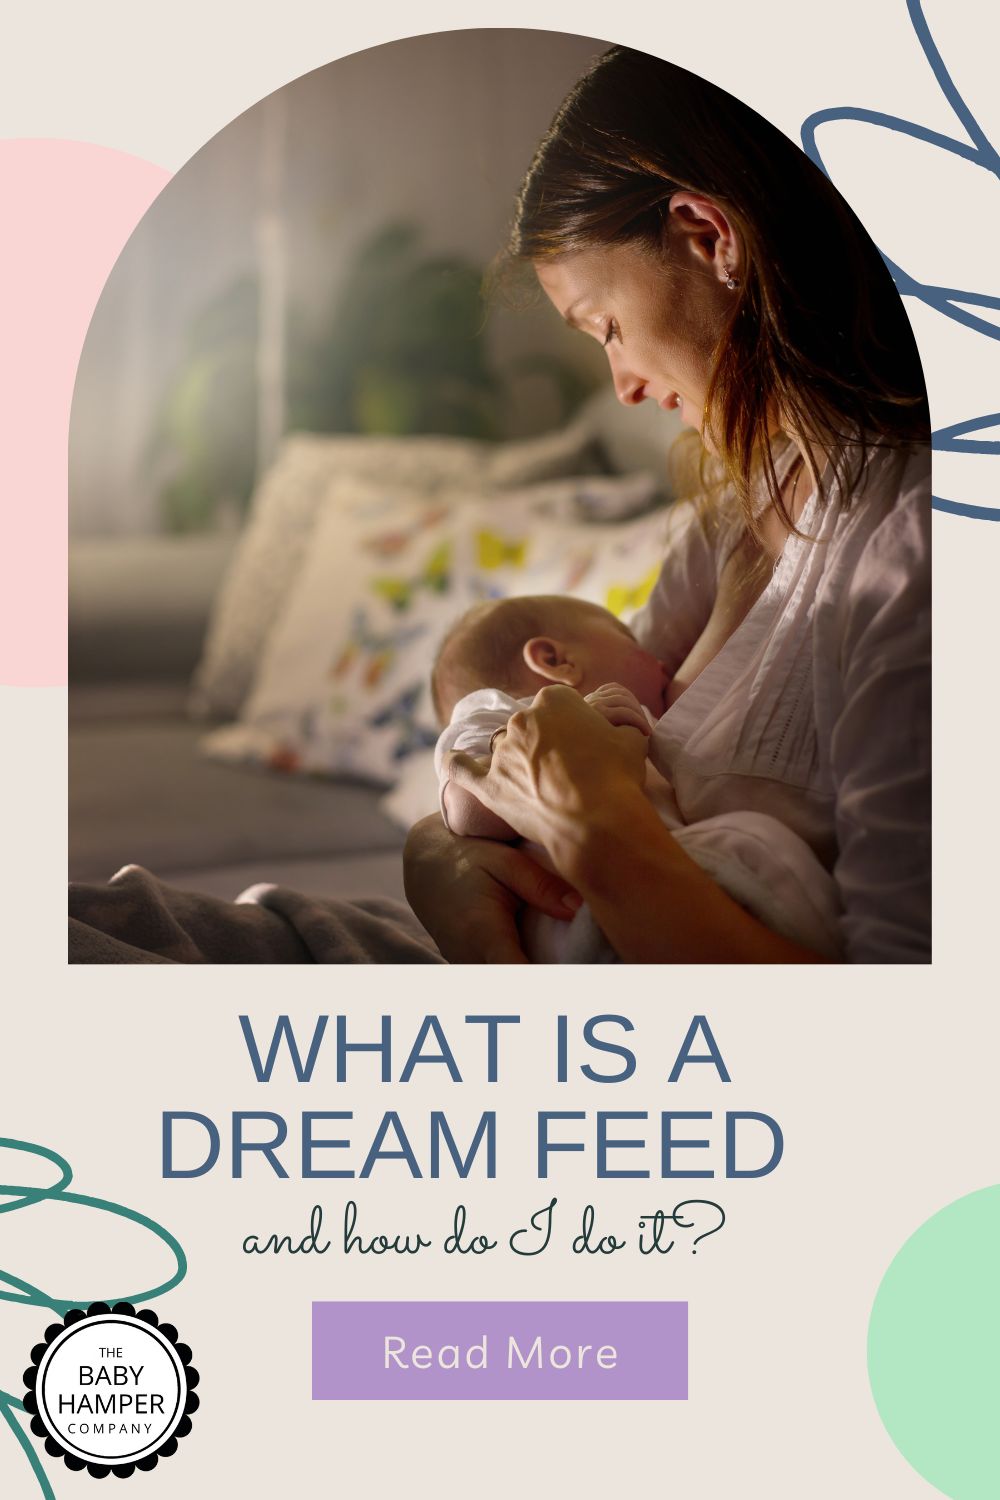 What Is A Dream Feed And How Do I Do It?